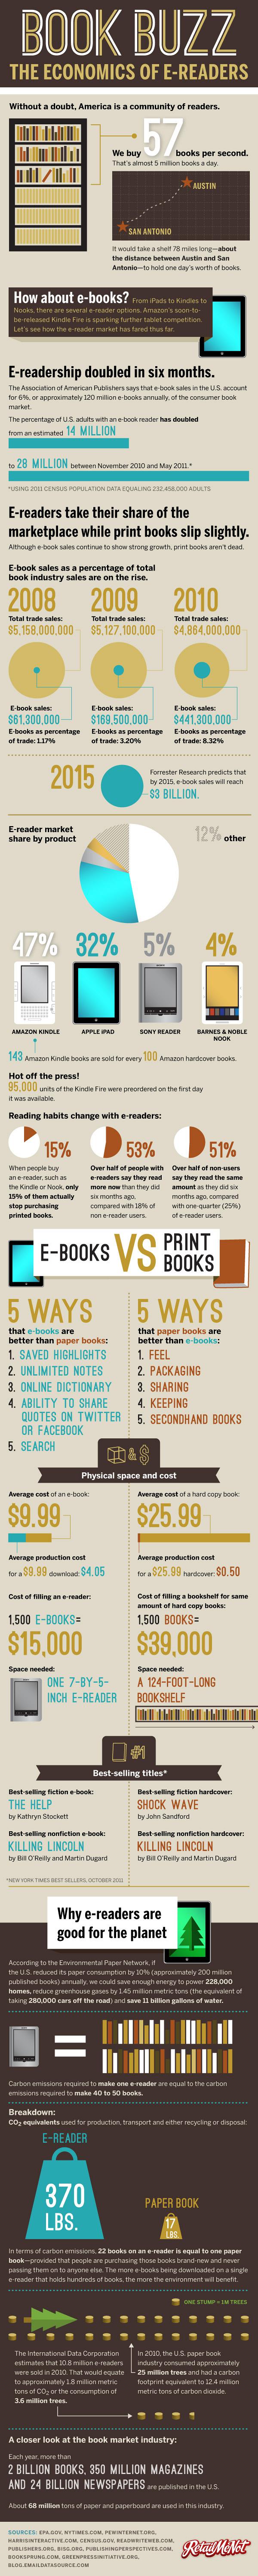 infographic ebook readers book publishing industry